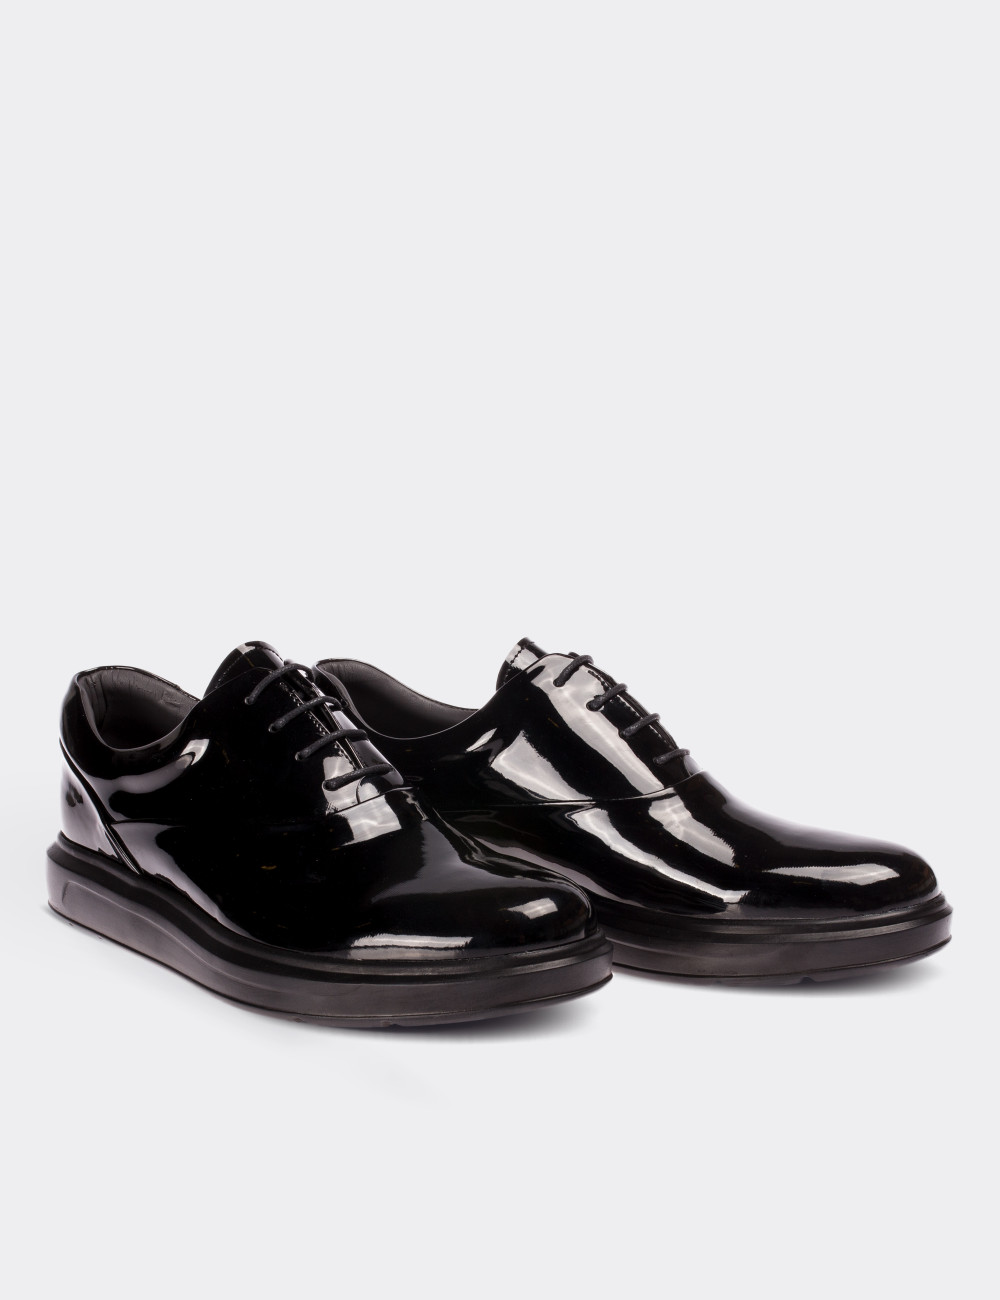 Black Patent Leather Comfort Lace-up Shoes - Deery